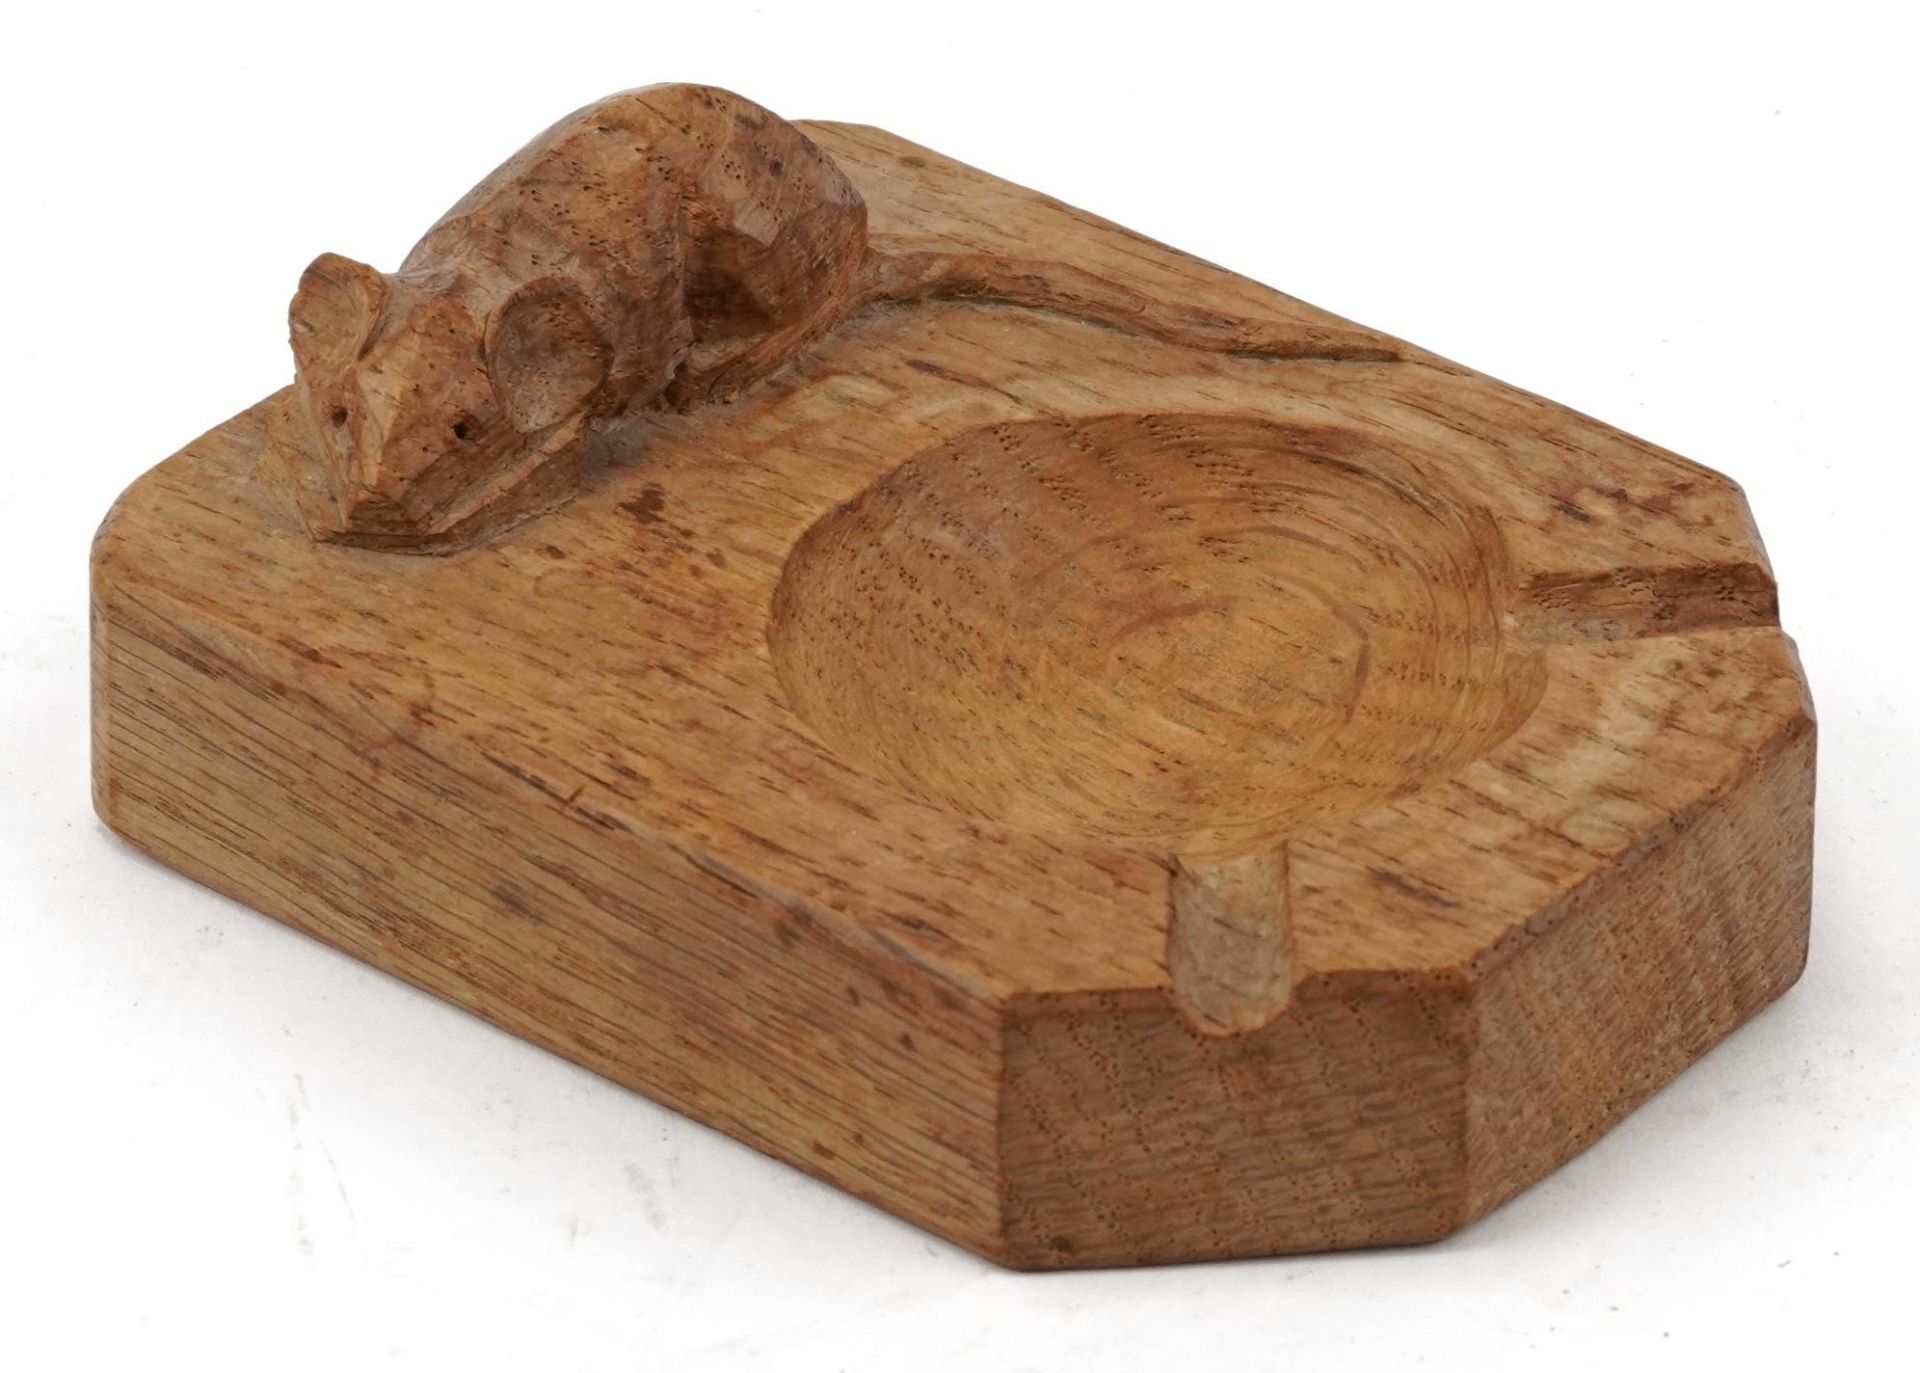 Robert Mouseman Thompson, light oak ashtray carved with signature mouse, 10cm wide : For further